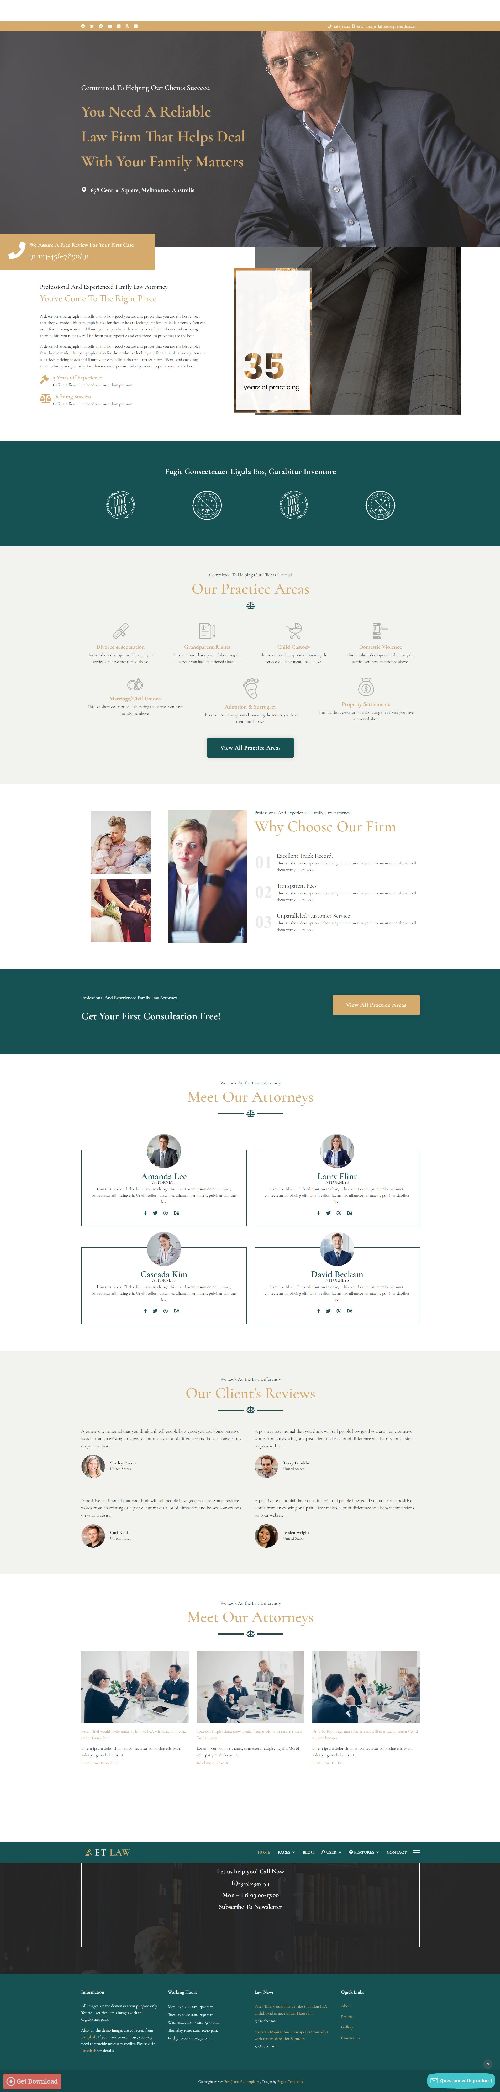 Law - Laws Firms and Lawyers Premium Joomla 4 Template